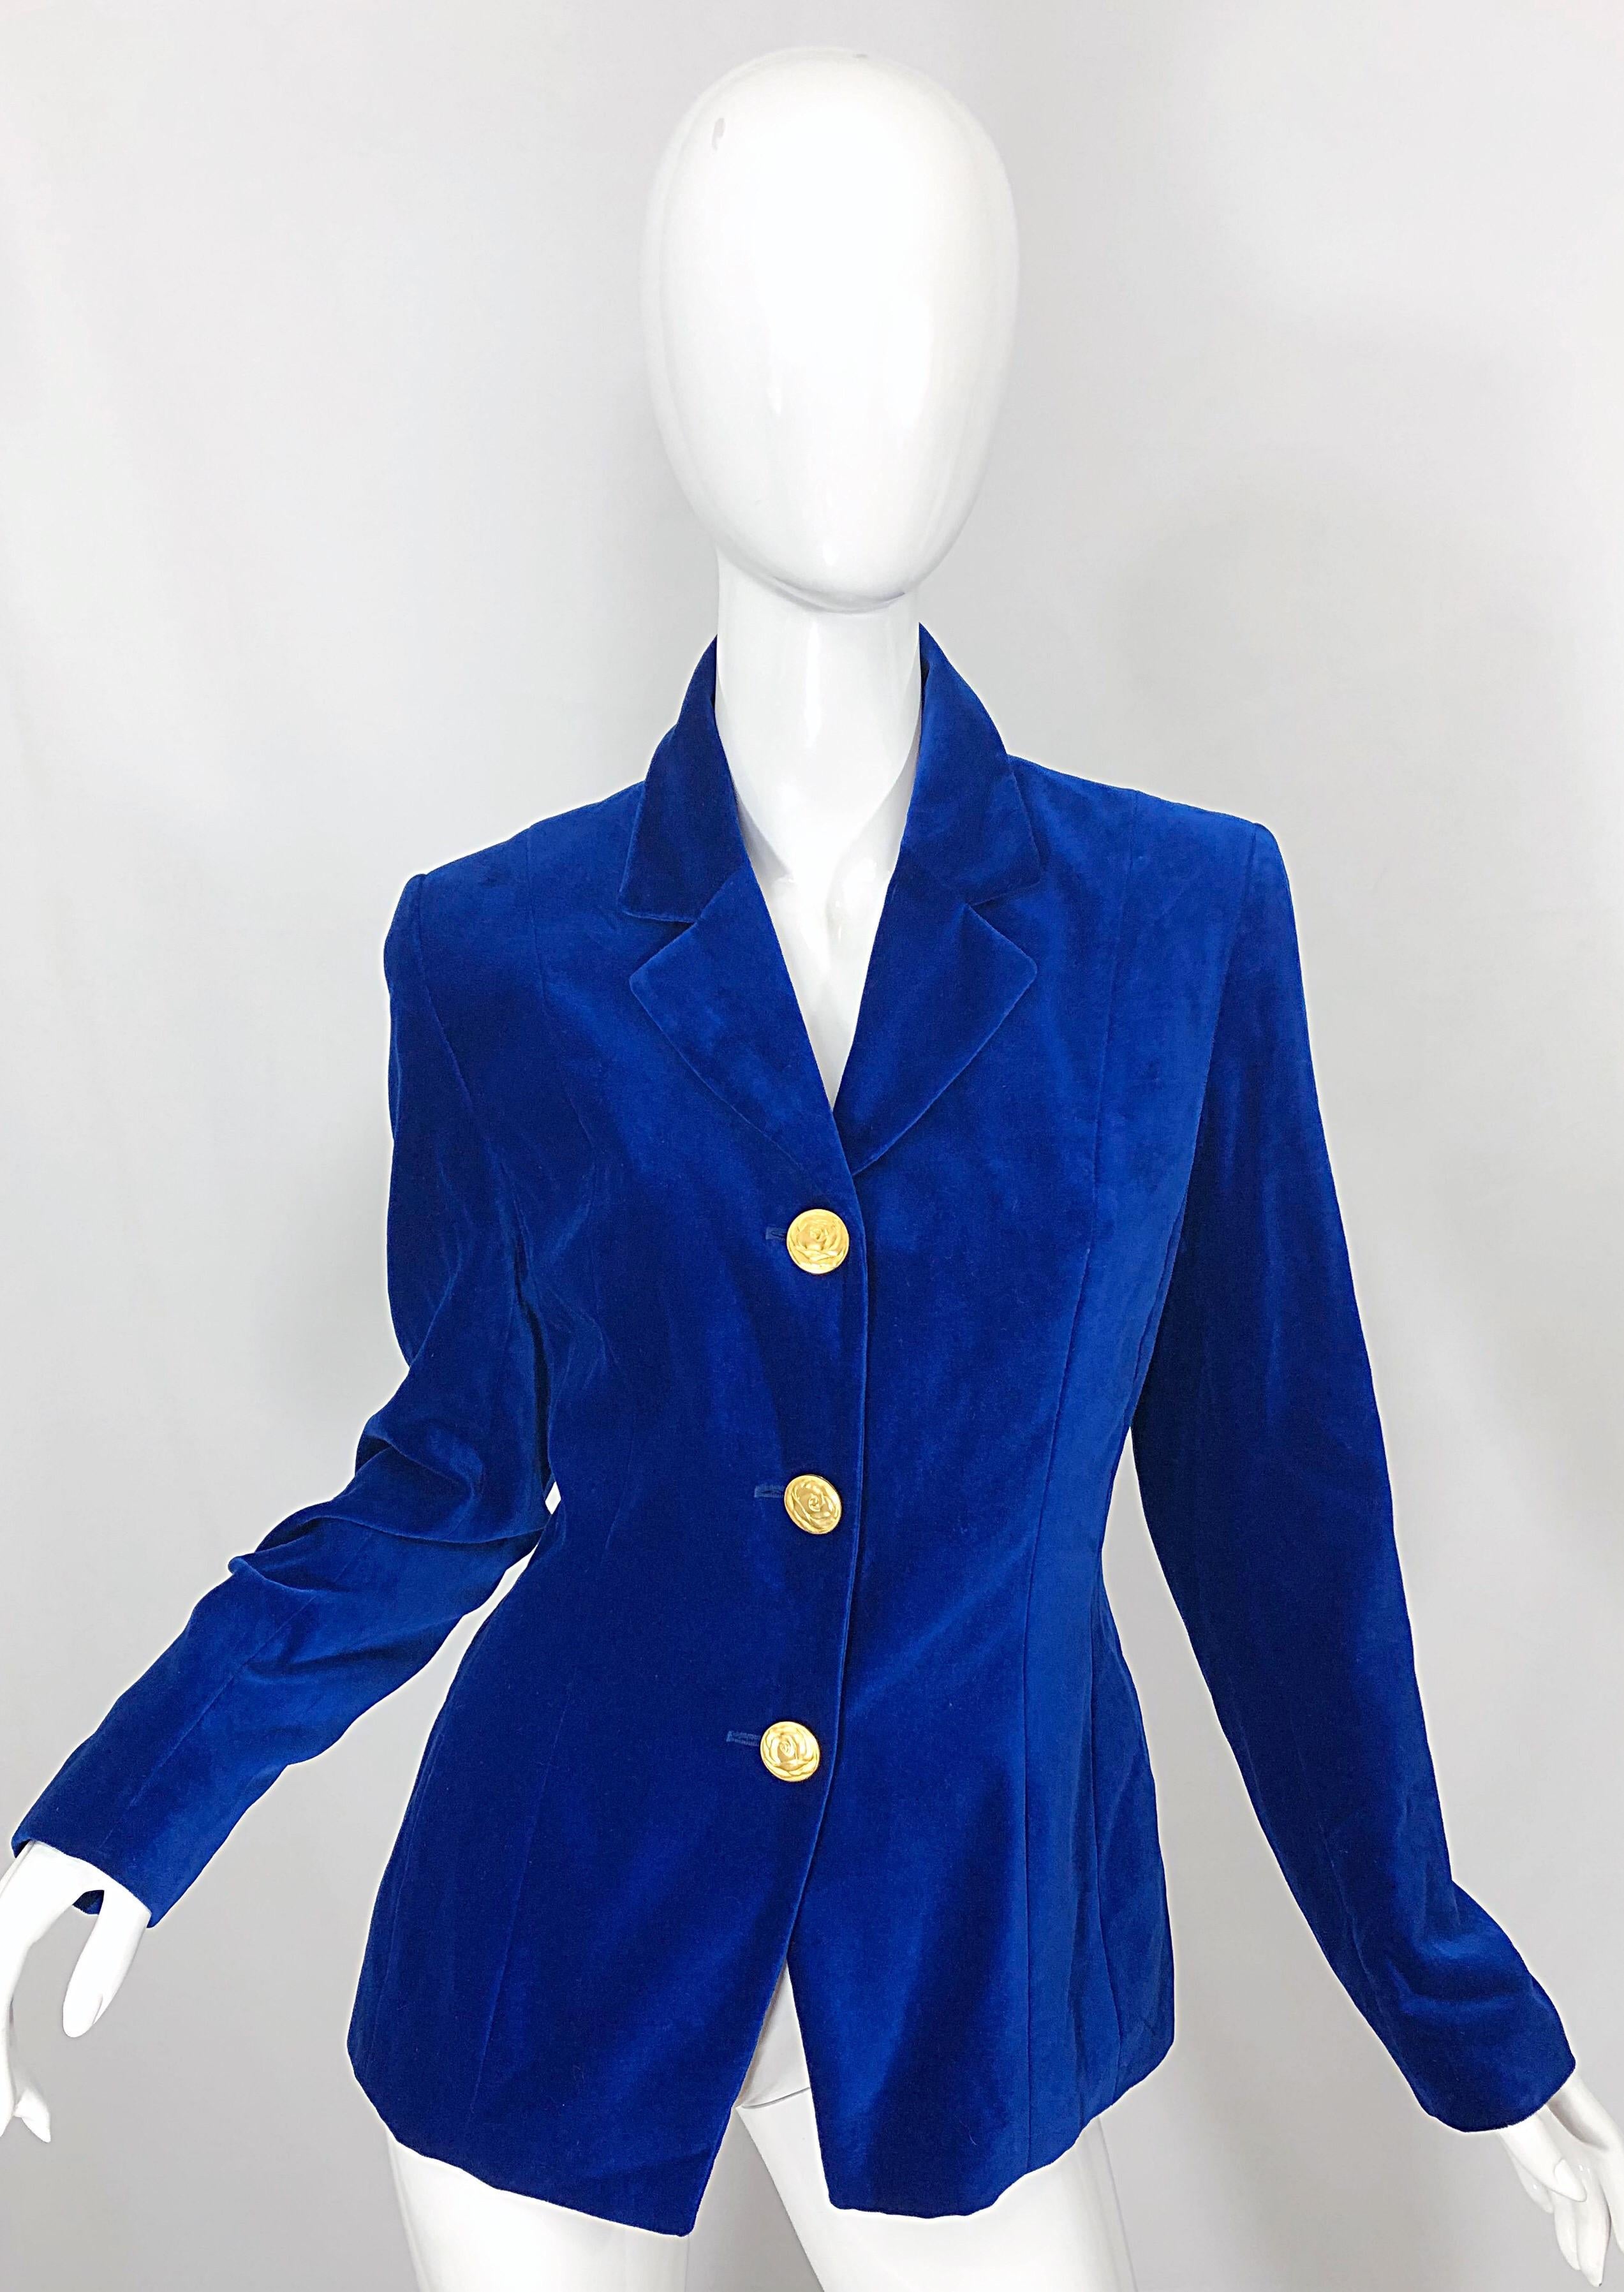 This 1990s CHRISTIAN LACROIX royal / cerulean blue velvet jacket adds a pop of color to any outfit! Smart tailored fit. Three large matte gold heart etched buttons up the front, and two at each sleeve cuff. Fully lined. Can easily be dressed up or